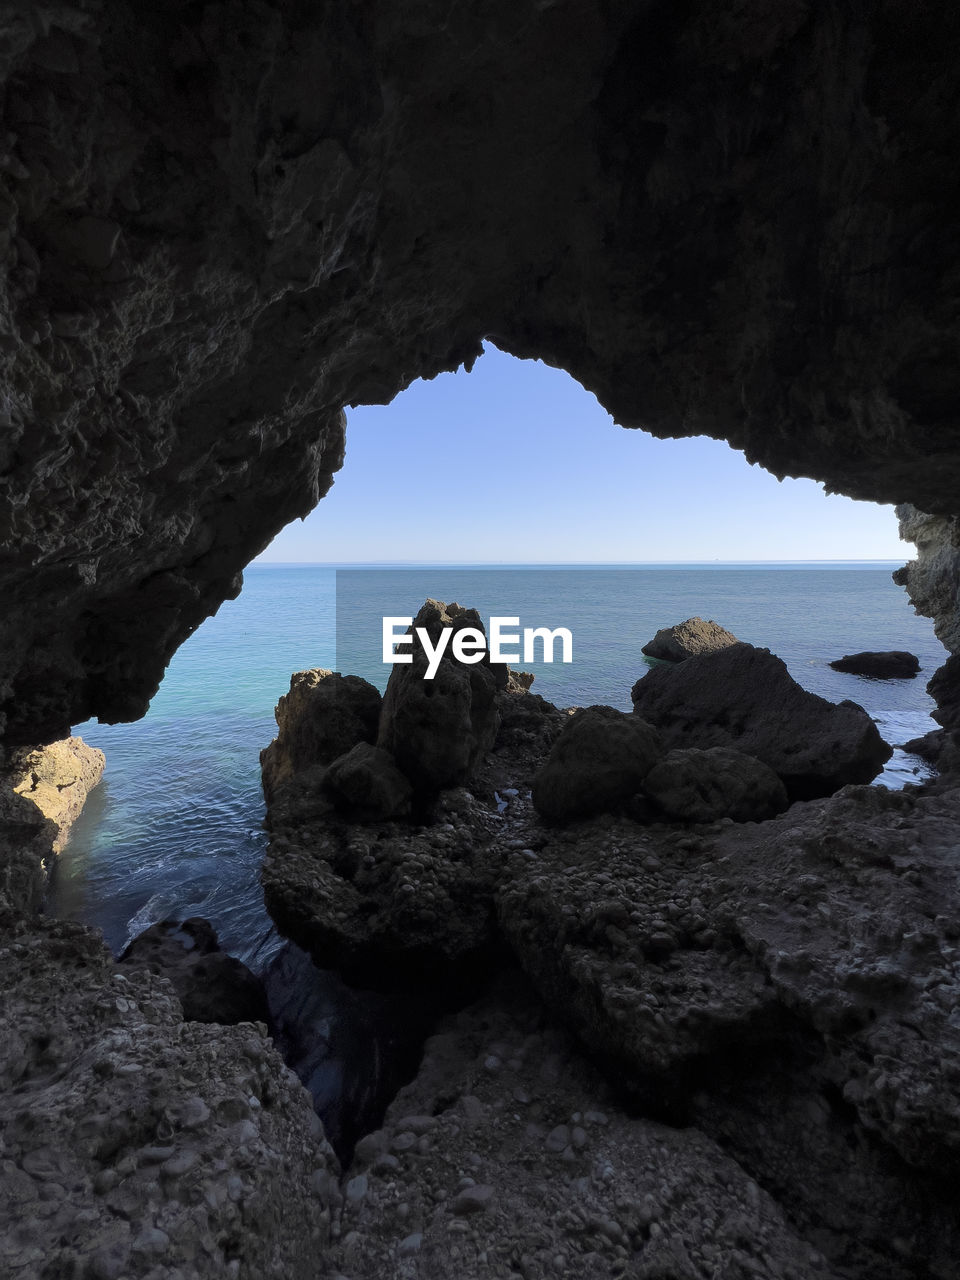 rock, water, sea, rock formation, sky, cave, nature, land, natural arch, beach, coast, beauty in nature, scenics - nature, formation, sea cave, arch, tranquility, no people, geology, ocean, outdoors, travel destinations, horizon over water, clear sky, hole, non-urban scene, blue, day, environment, physical geography, travel, architecture, darkness, tranquil scene, silhouette, terrain, bay, dark, horizon, landscape, idyllic, cliff